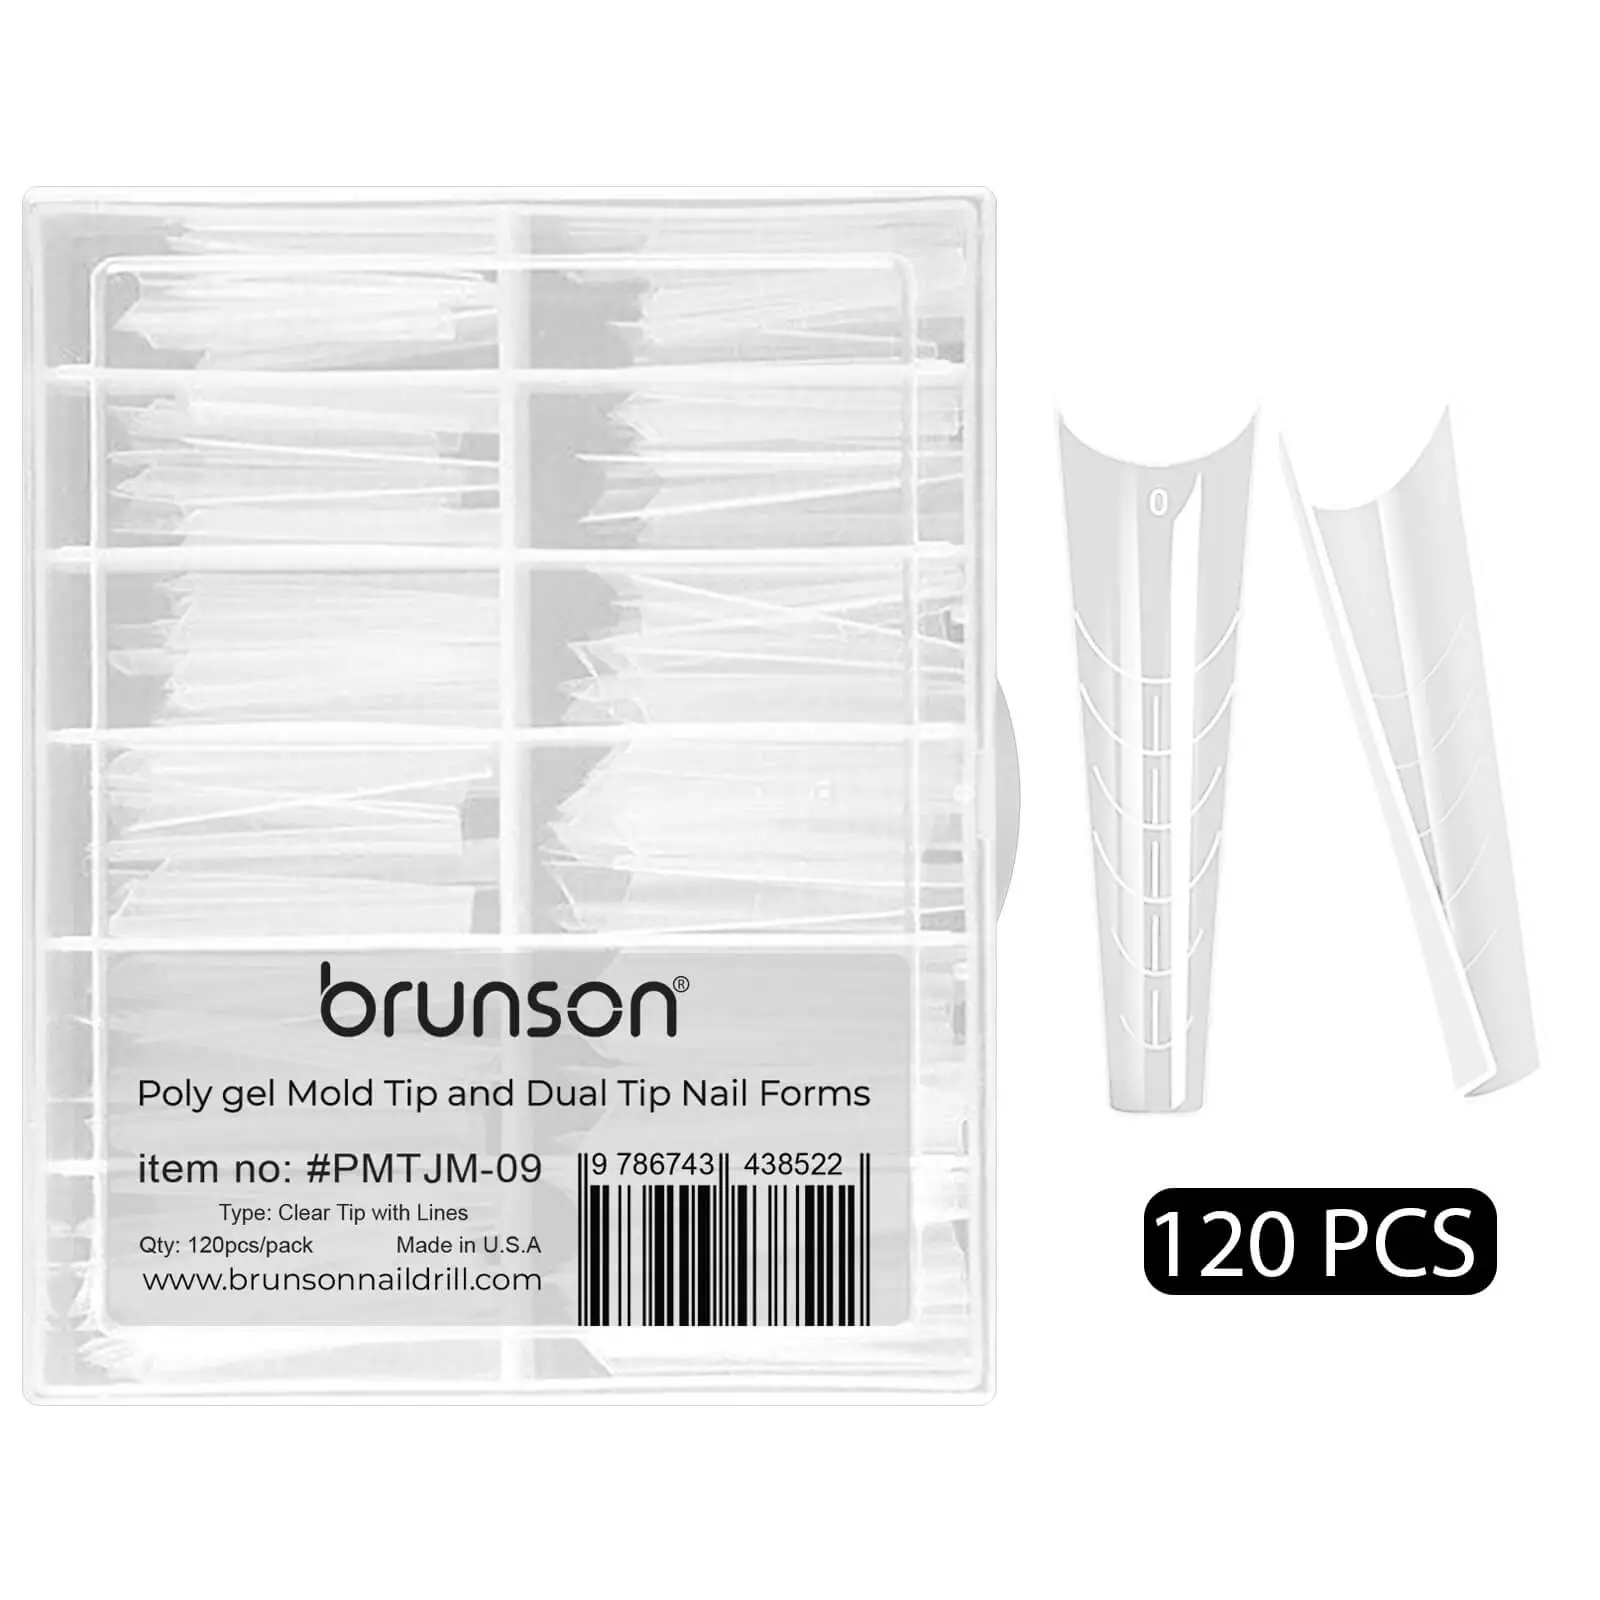 Poly-Gel-Mold-Tip-and-Dual-Tip-Nail-Forms-PMTJM-09-Brunson-1